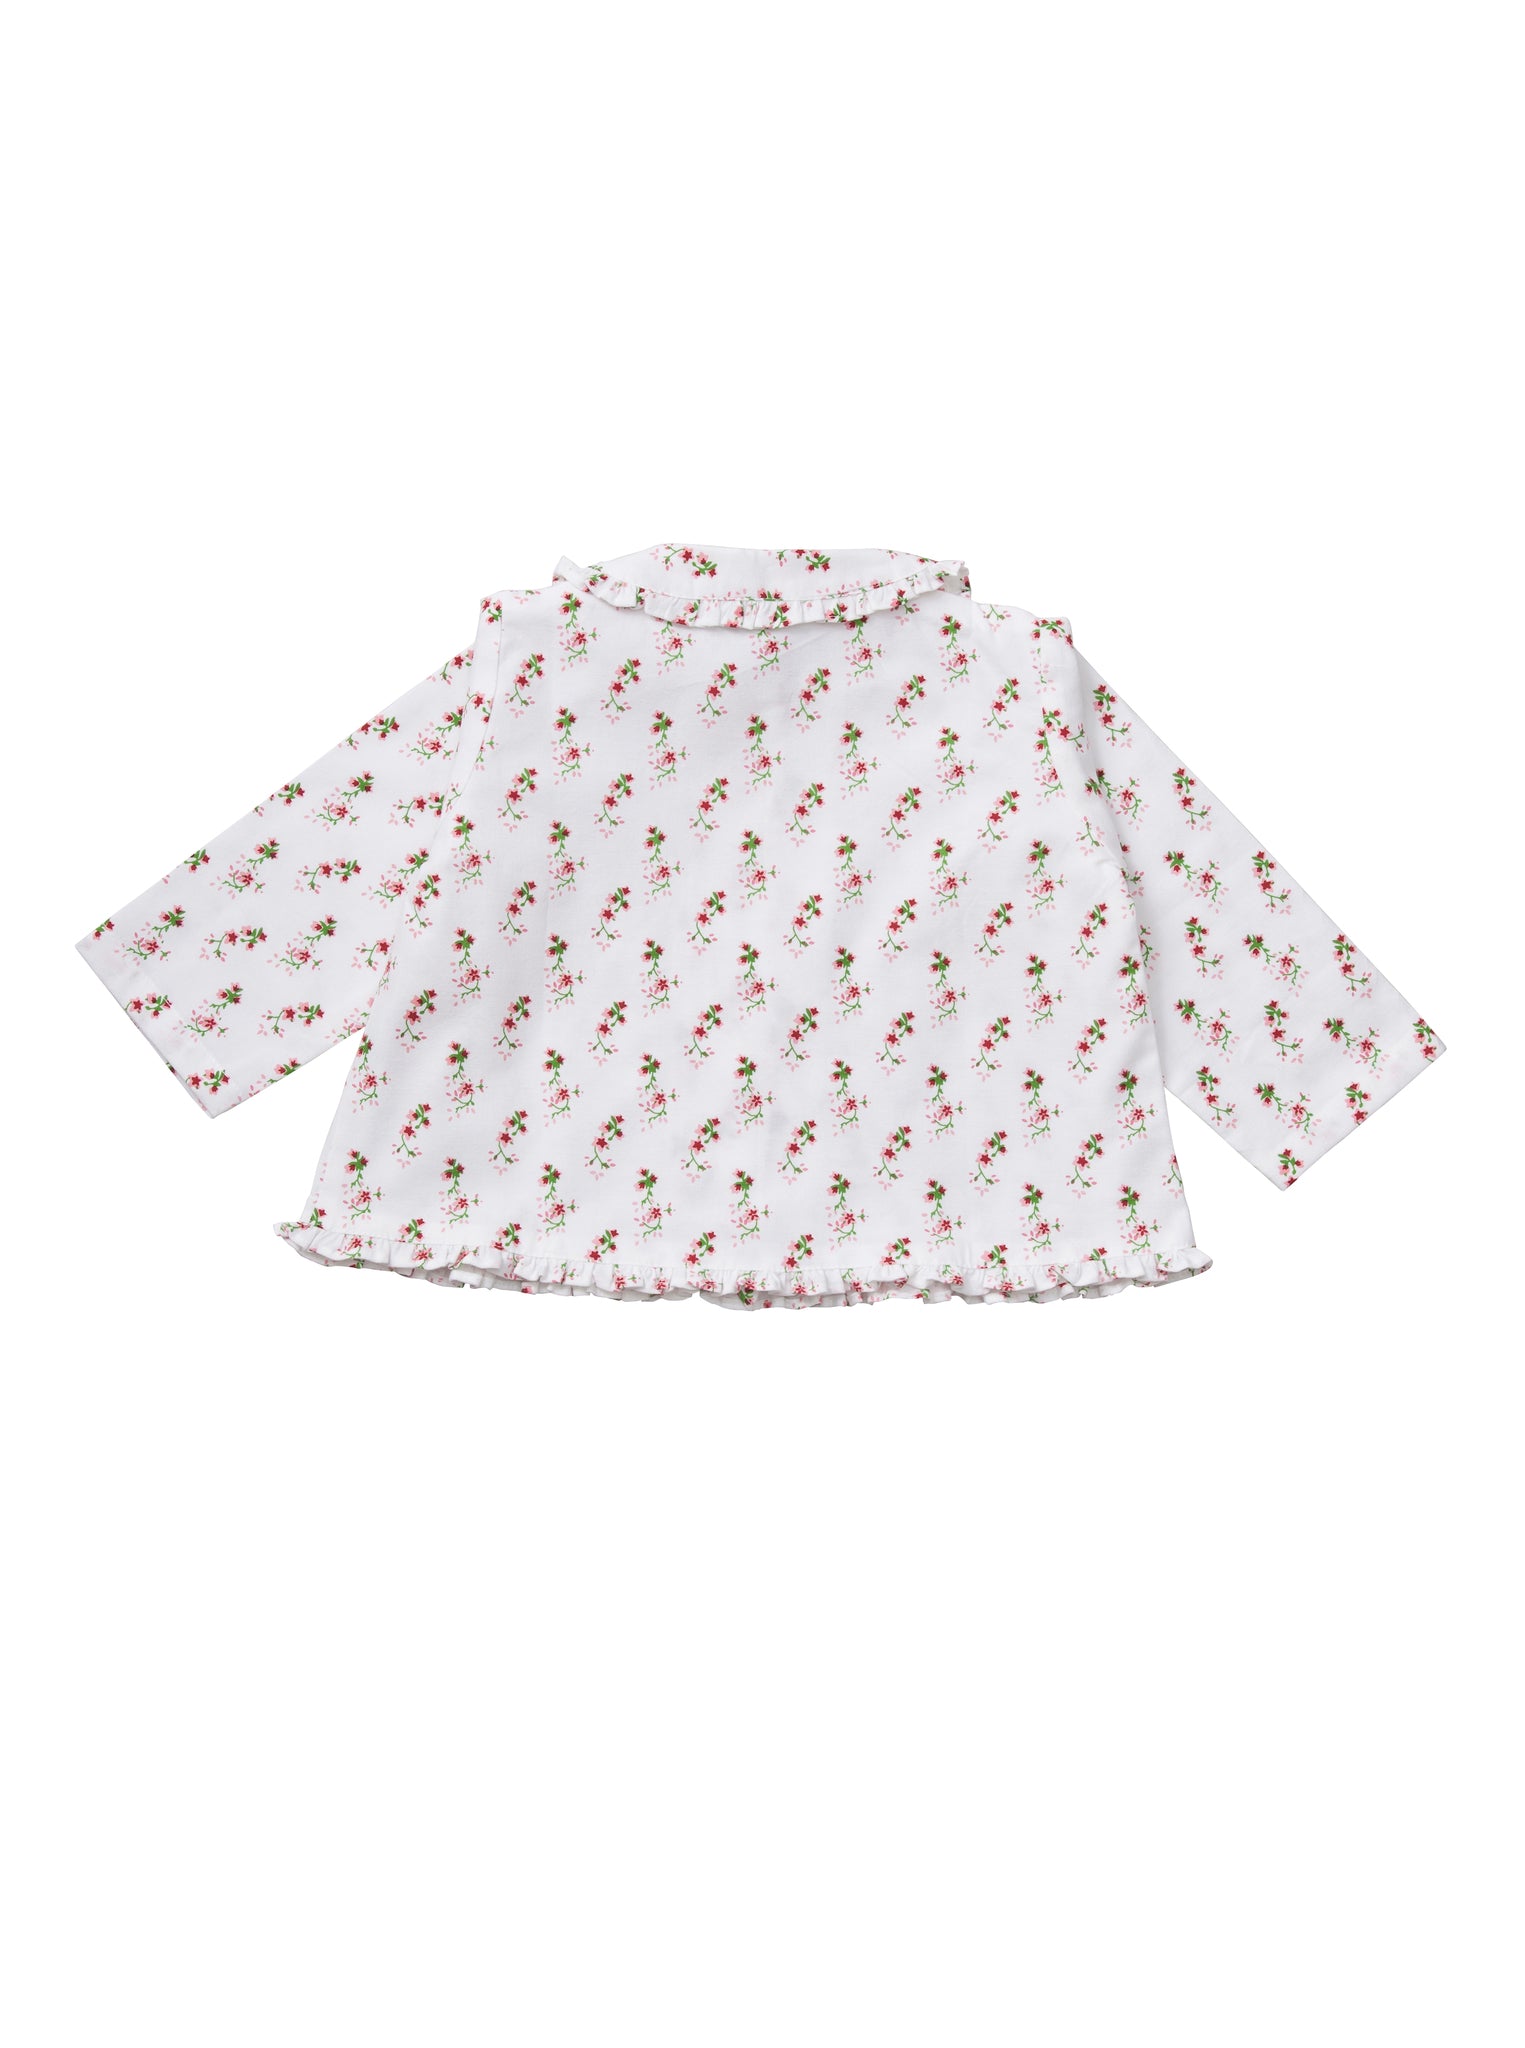 Classic floral print cotton pyjamas for children from Turquaz. Top back.